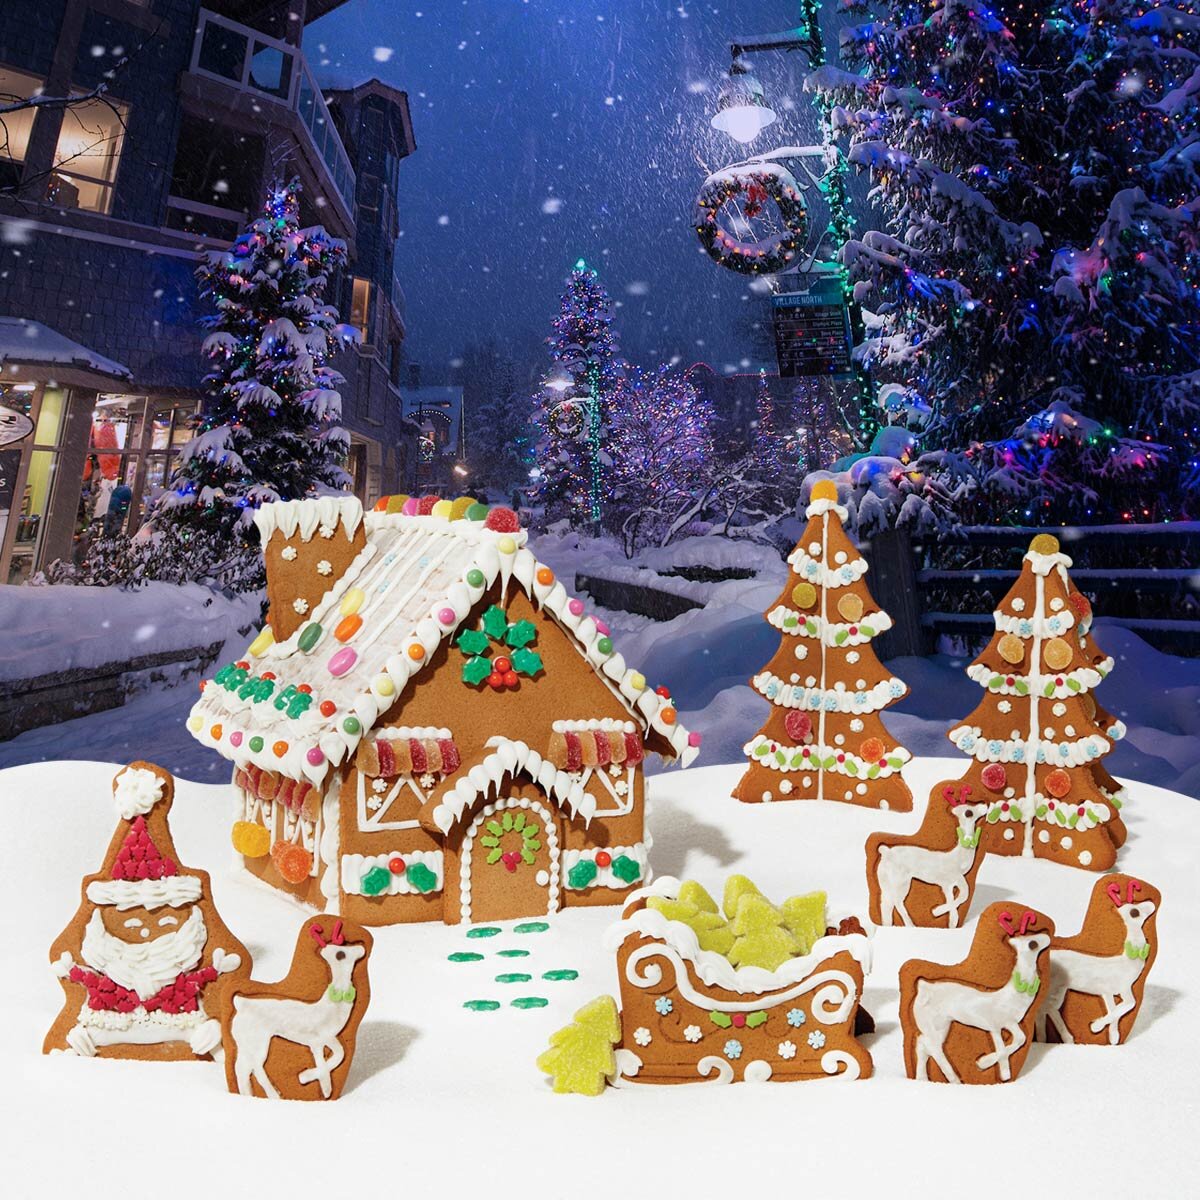 Kit,　Sleigh　Tree　Gingerbread　with　House　Santa,　1.74kg　|...